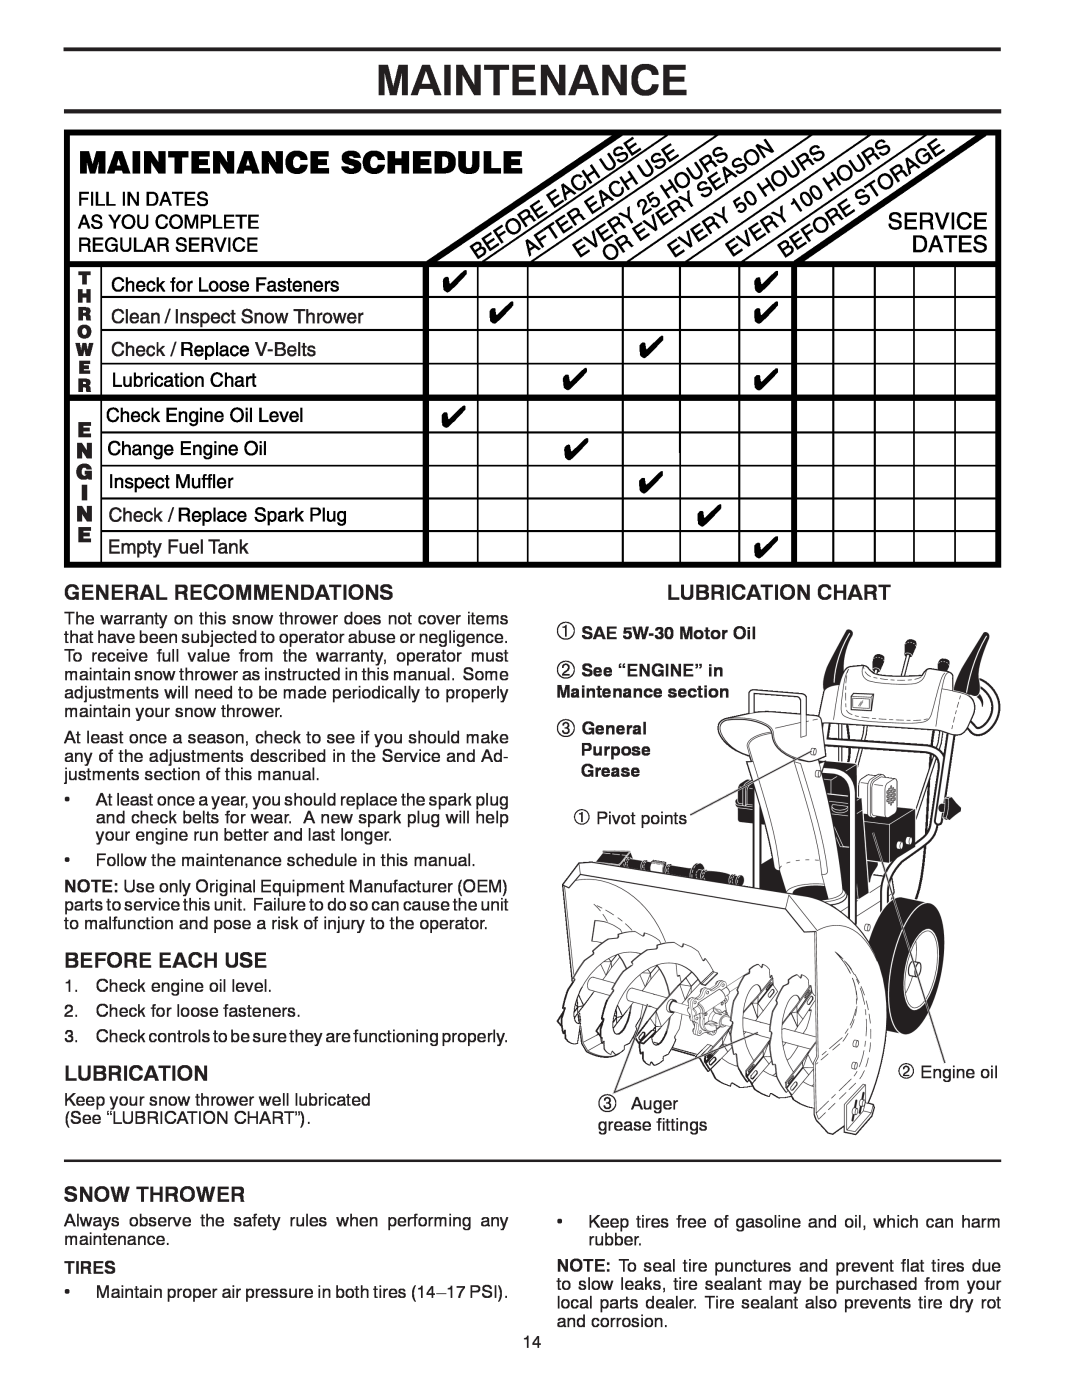 Poulan PR8P27ES, 438361 Maintenance, General Recommendations, Before Each Use, Snow Thrower, Lubrication Chart, Tires 